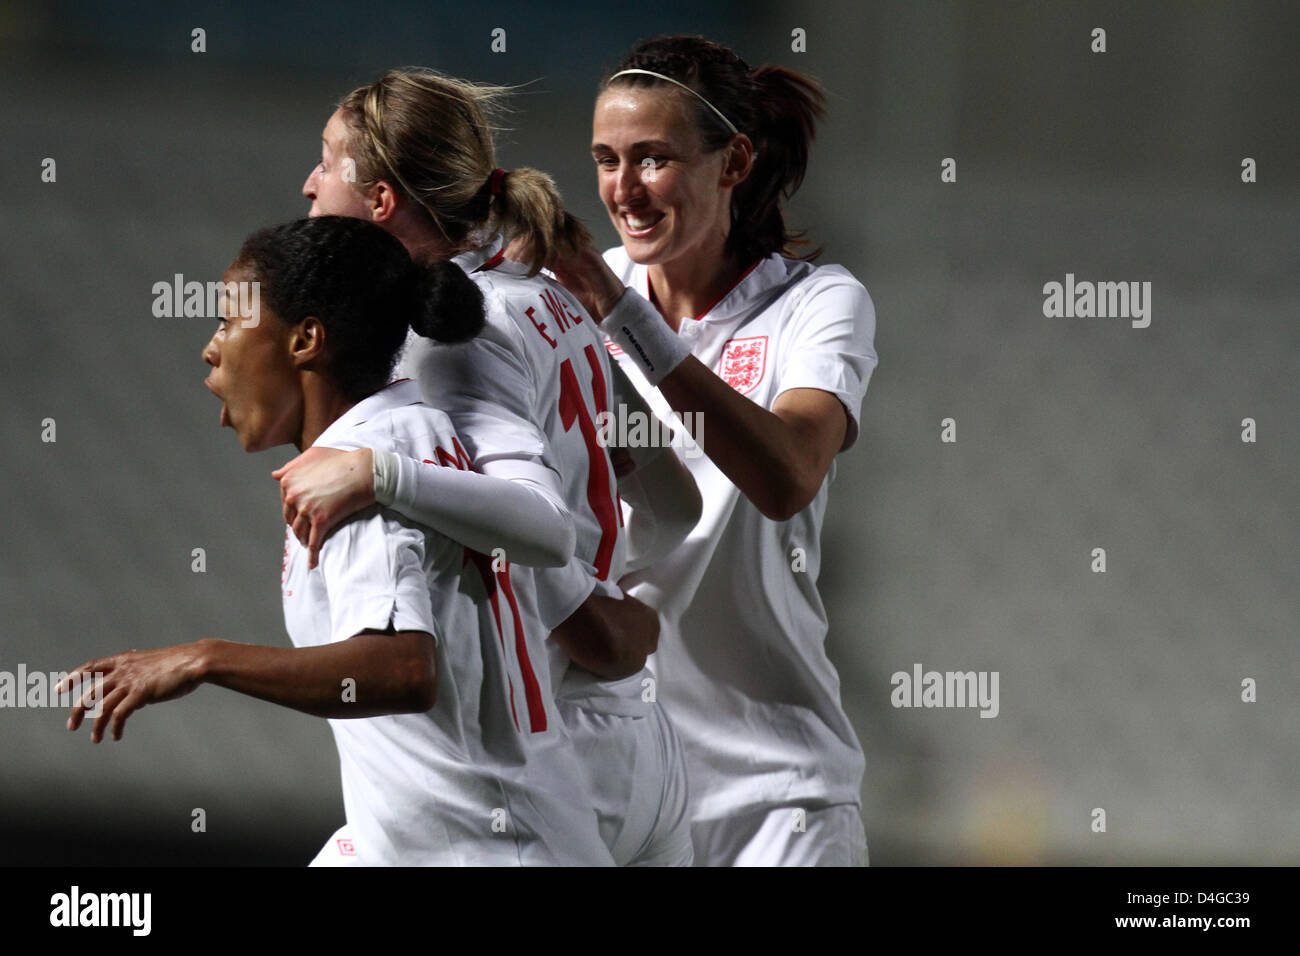 CYPRUS,NICOSIA-MARCH 9:Rachel Yankey of England celebrate a goal   during the game between England and Canada for the Final of Cyprus Football Womens Cup in Nicosia on March 13,2013 Stock Photo